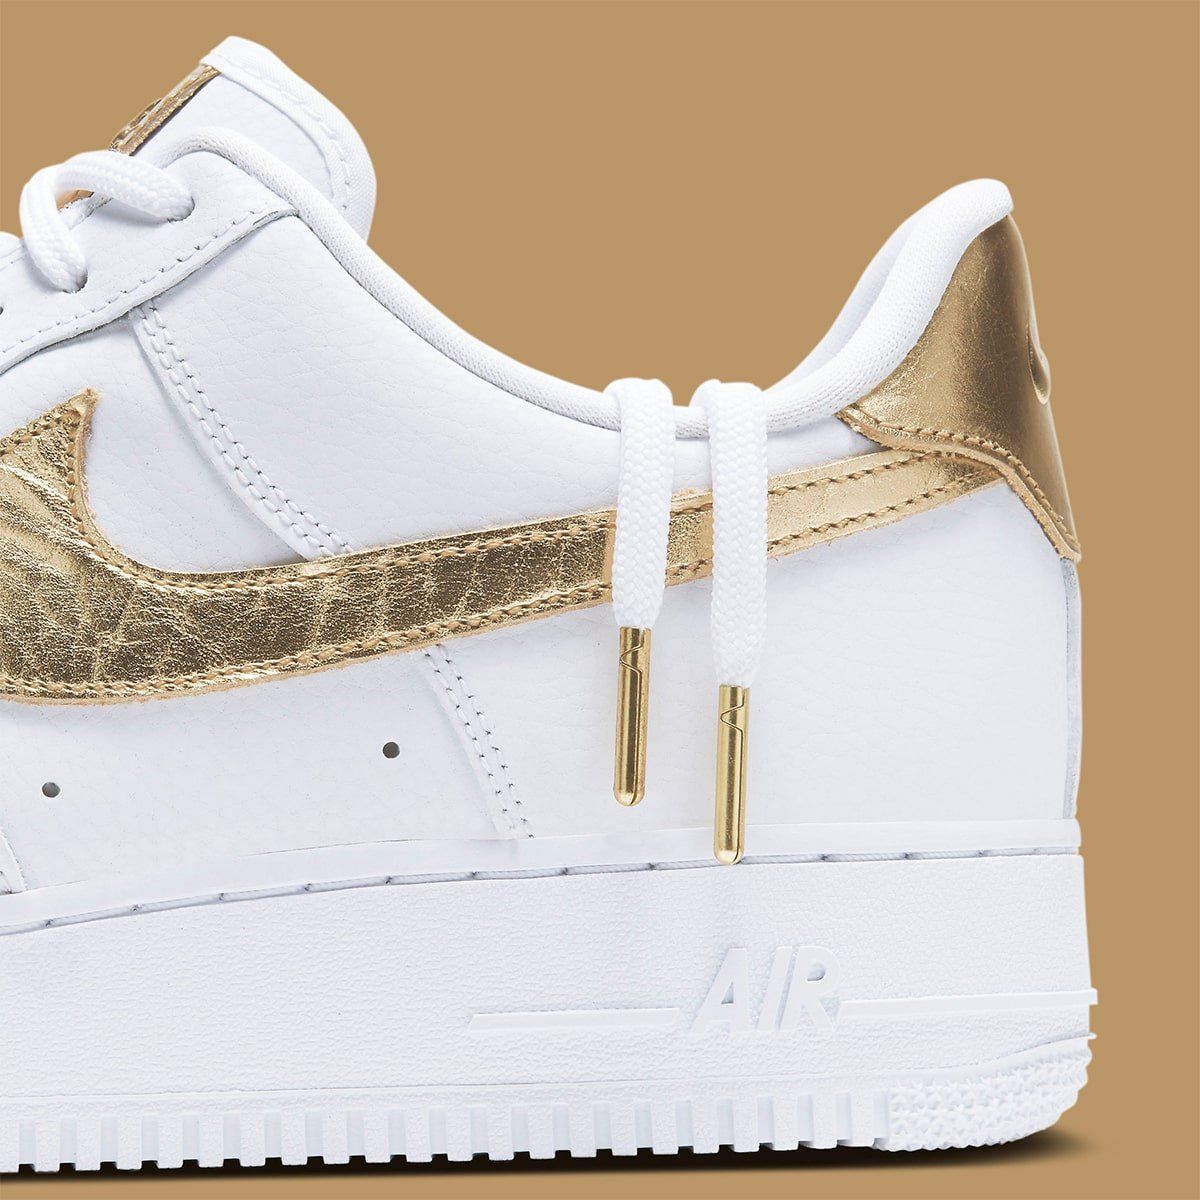 The Air Force 1 Gears-Up with Gold Foil and Elegant Encrusted Hardware ...